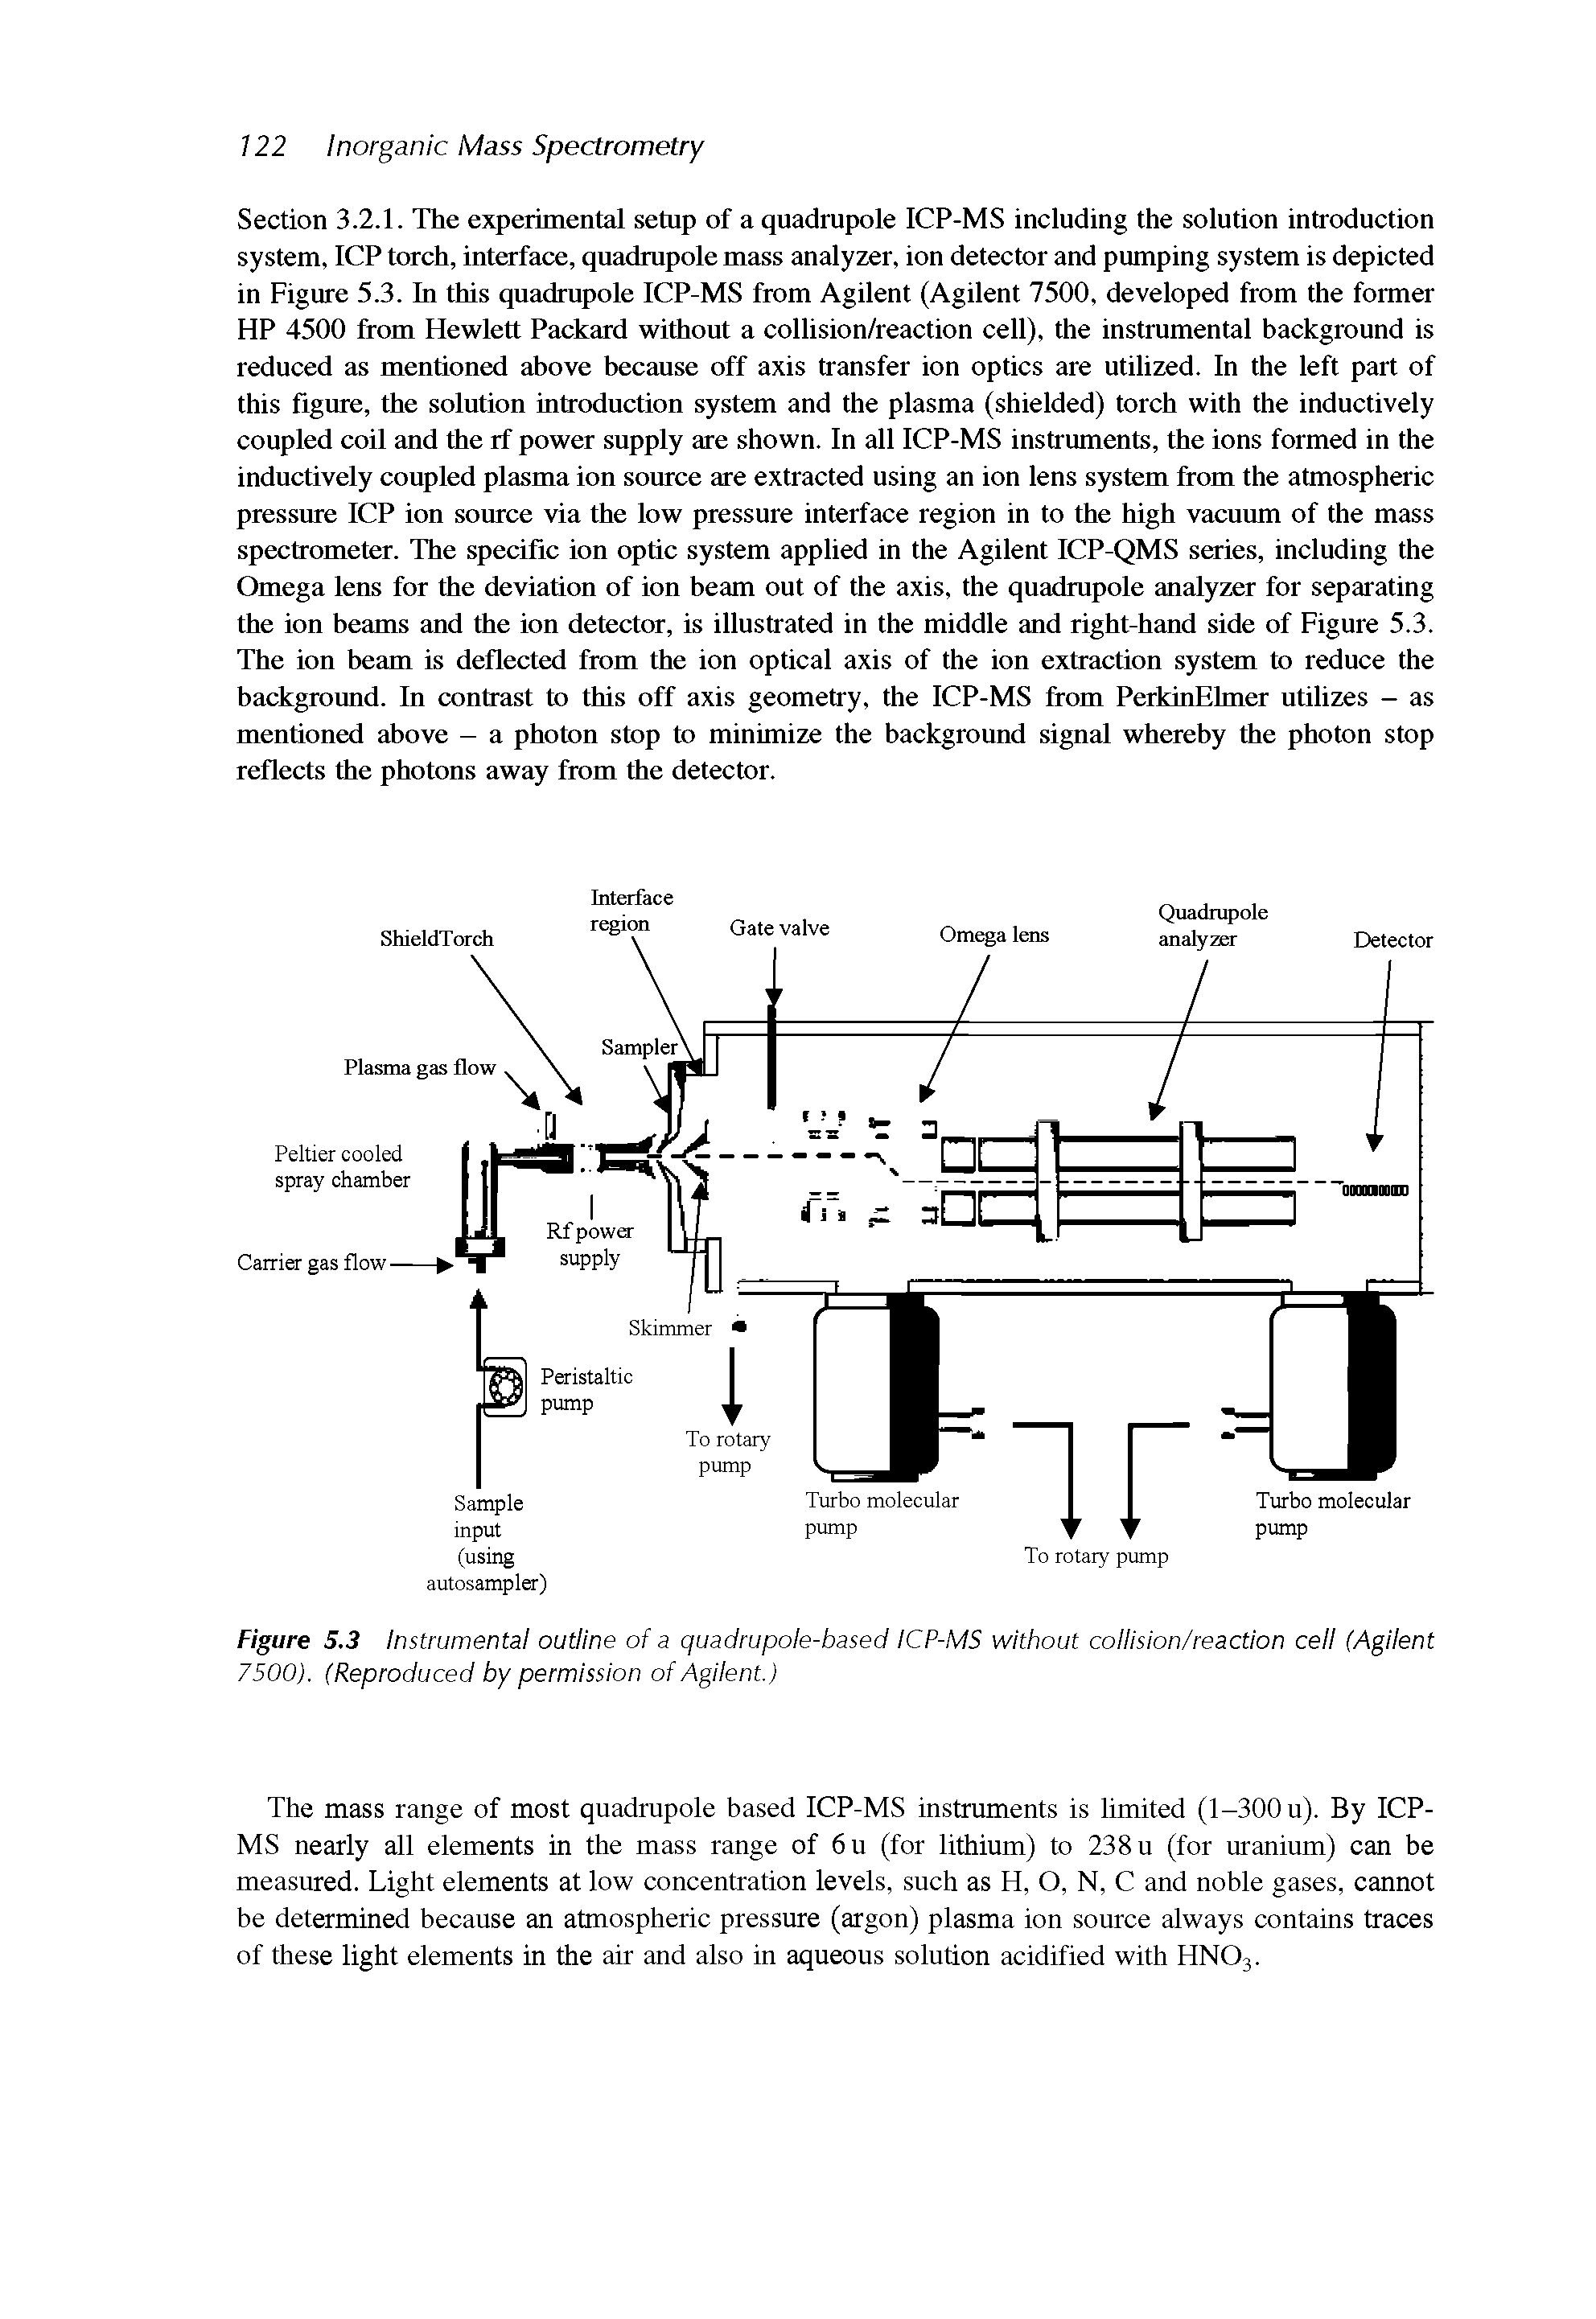 Figure 5.3 Instrumental outline of a quadrupole-based ICP-MS without collision/reaction cell (Agilent 7500). (Reproduced by permission of Agilent.)...